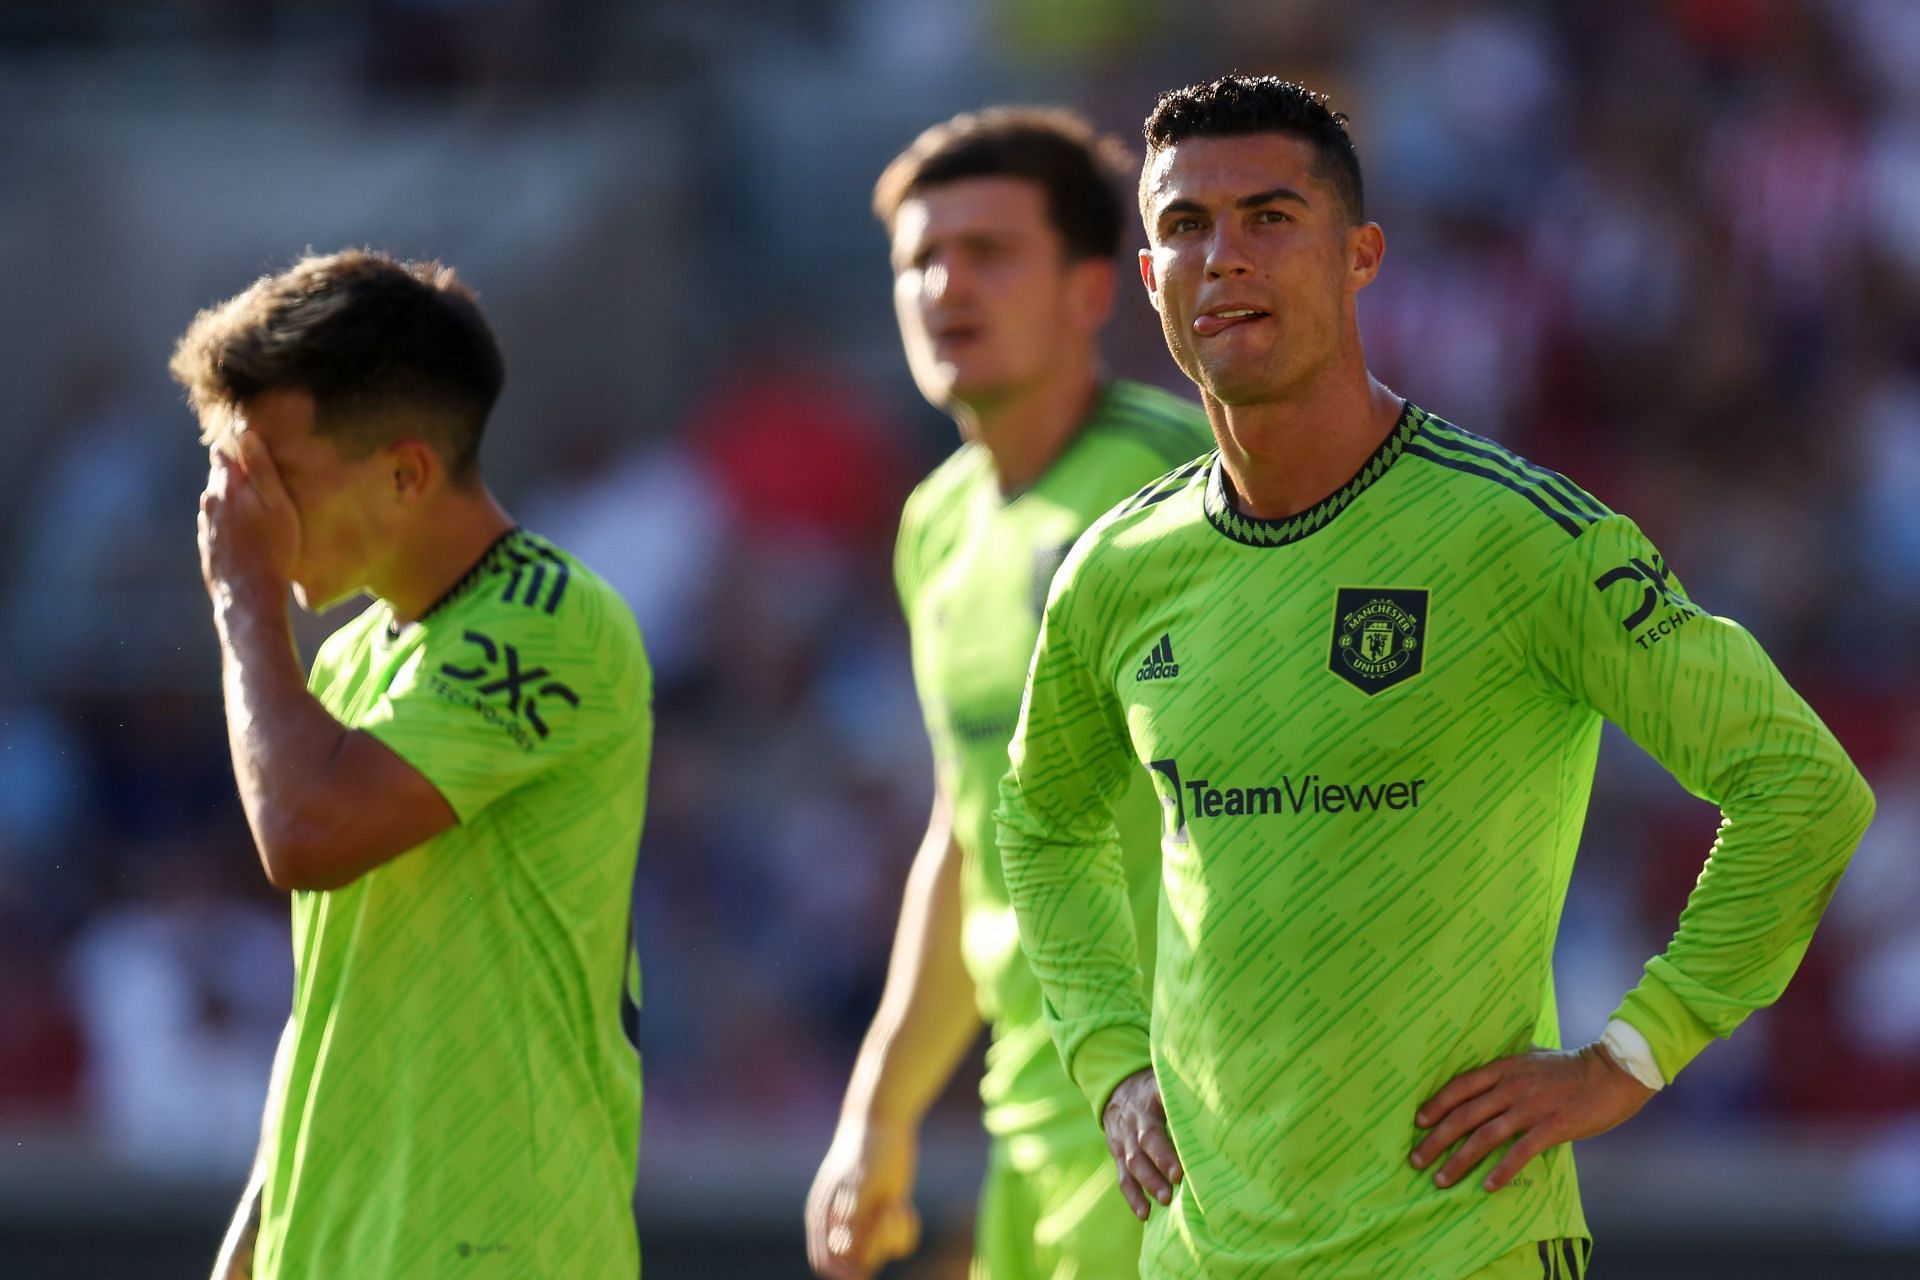 Cristiano Ronaldo started his first game of the season against Brentford.